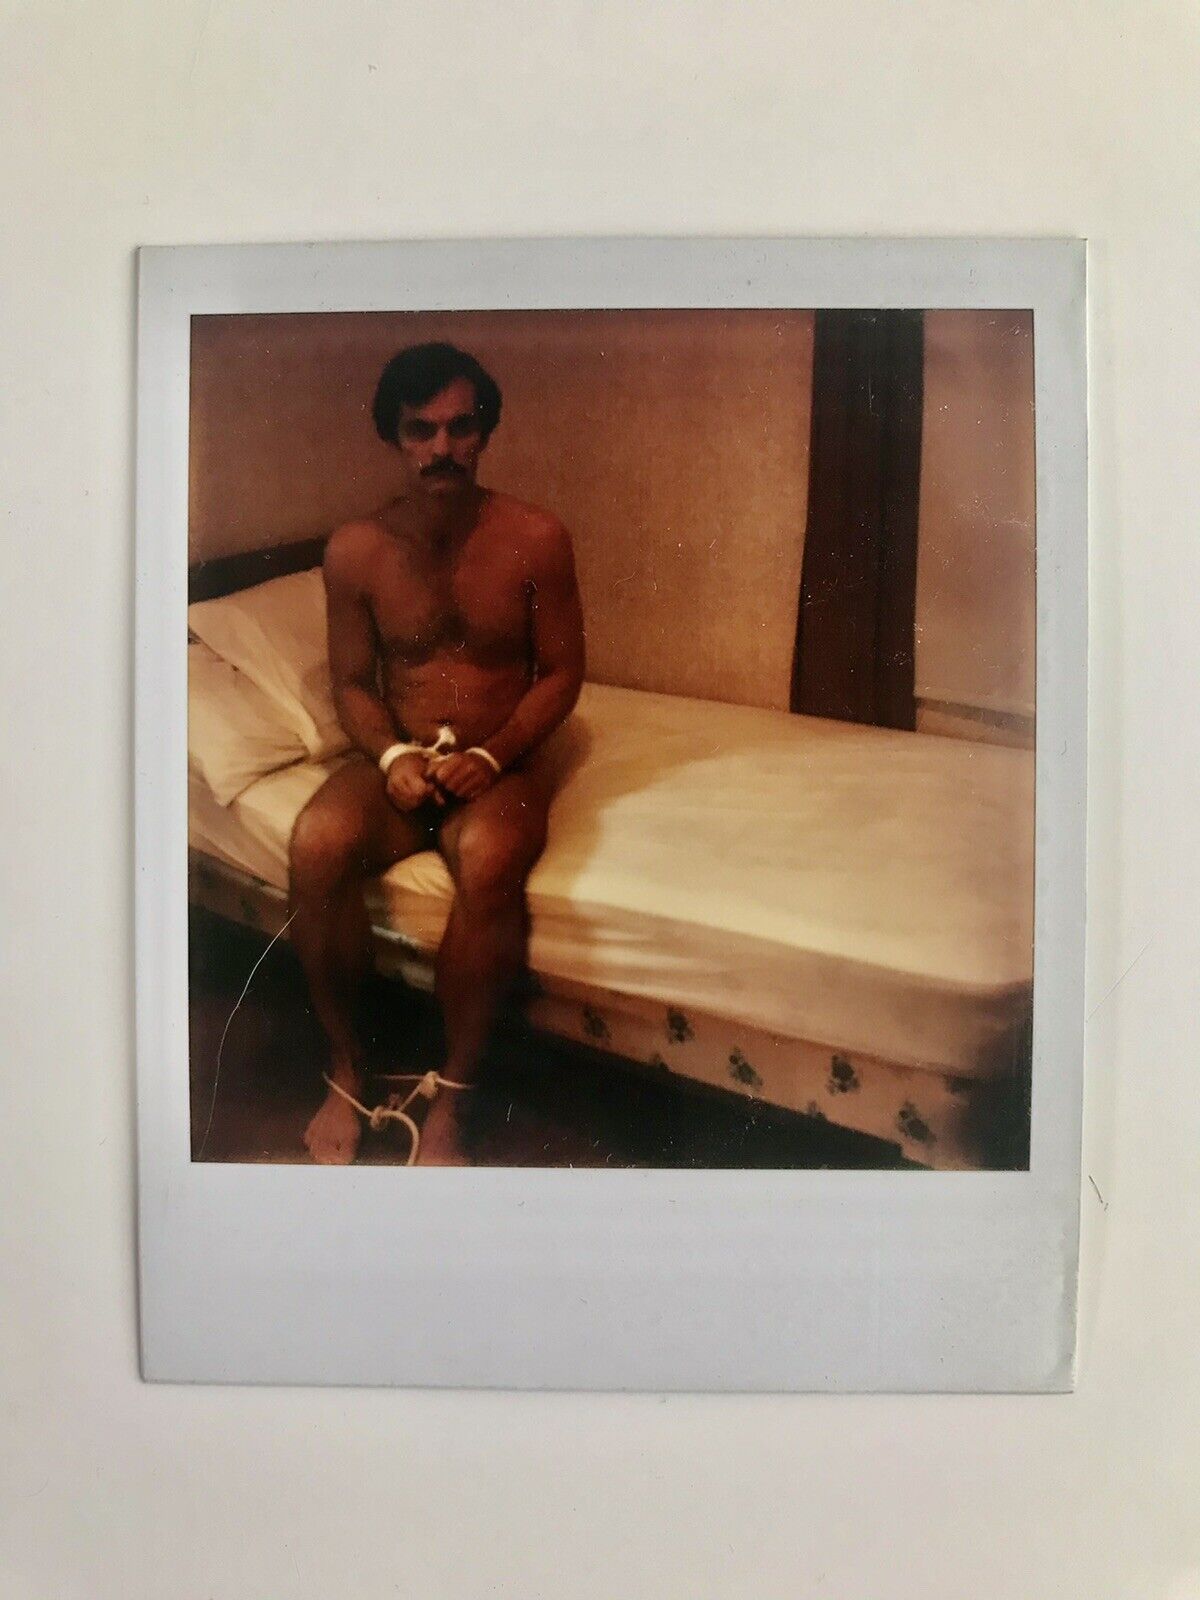 Vintage Polaroid Handsome Man “Tied Up In Tennessee 1978